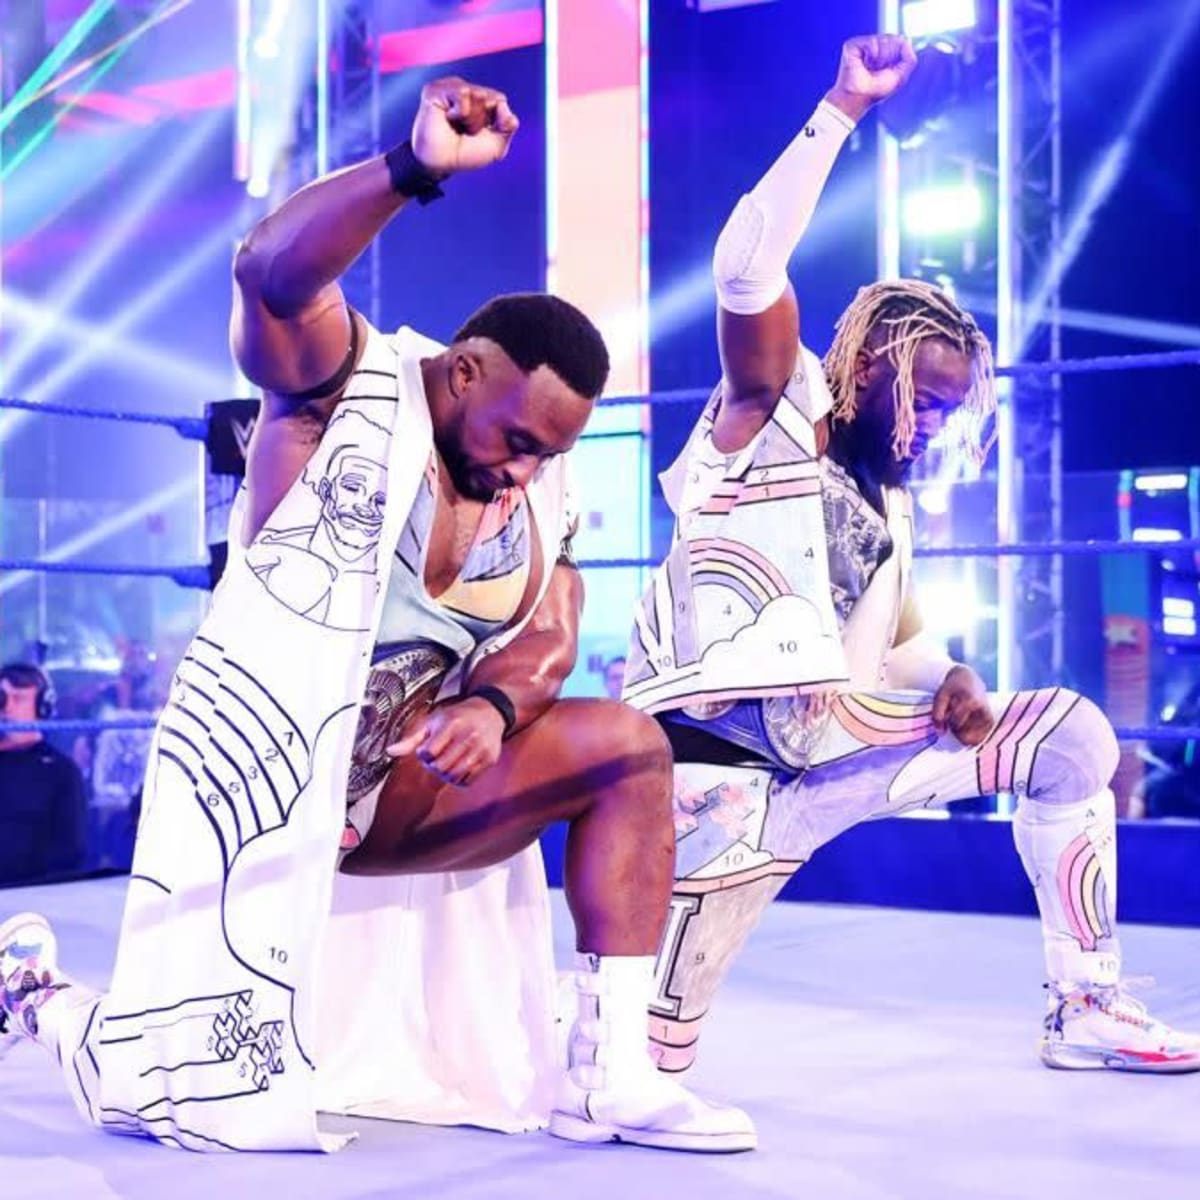 strottenhoofd Email Luxe WWE's Big E embarking on long-awaited singles run after New Day injuries -  Sports Illustrated